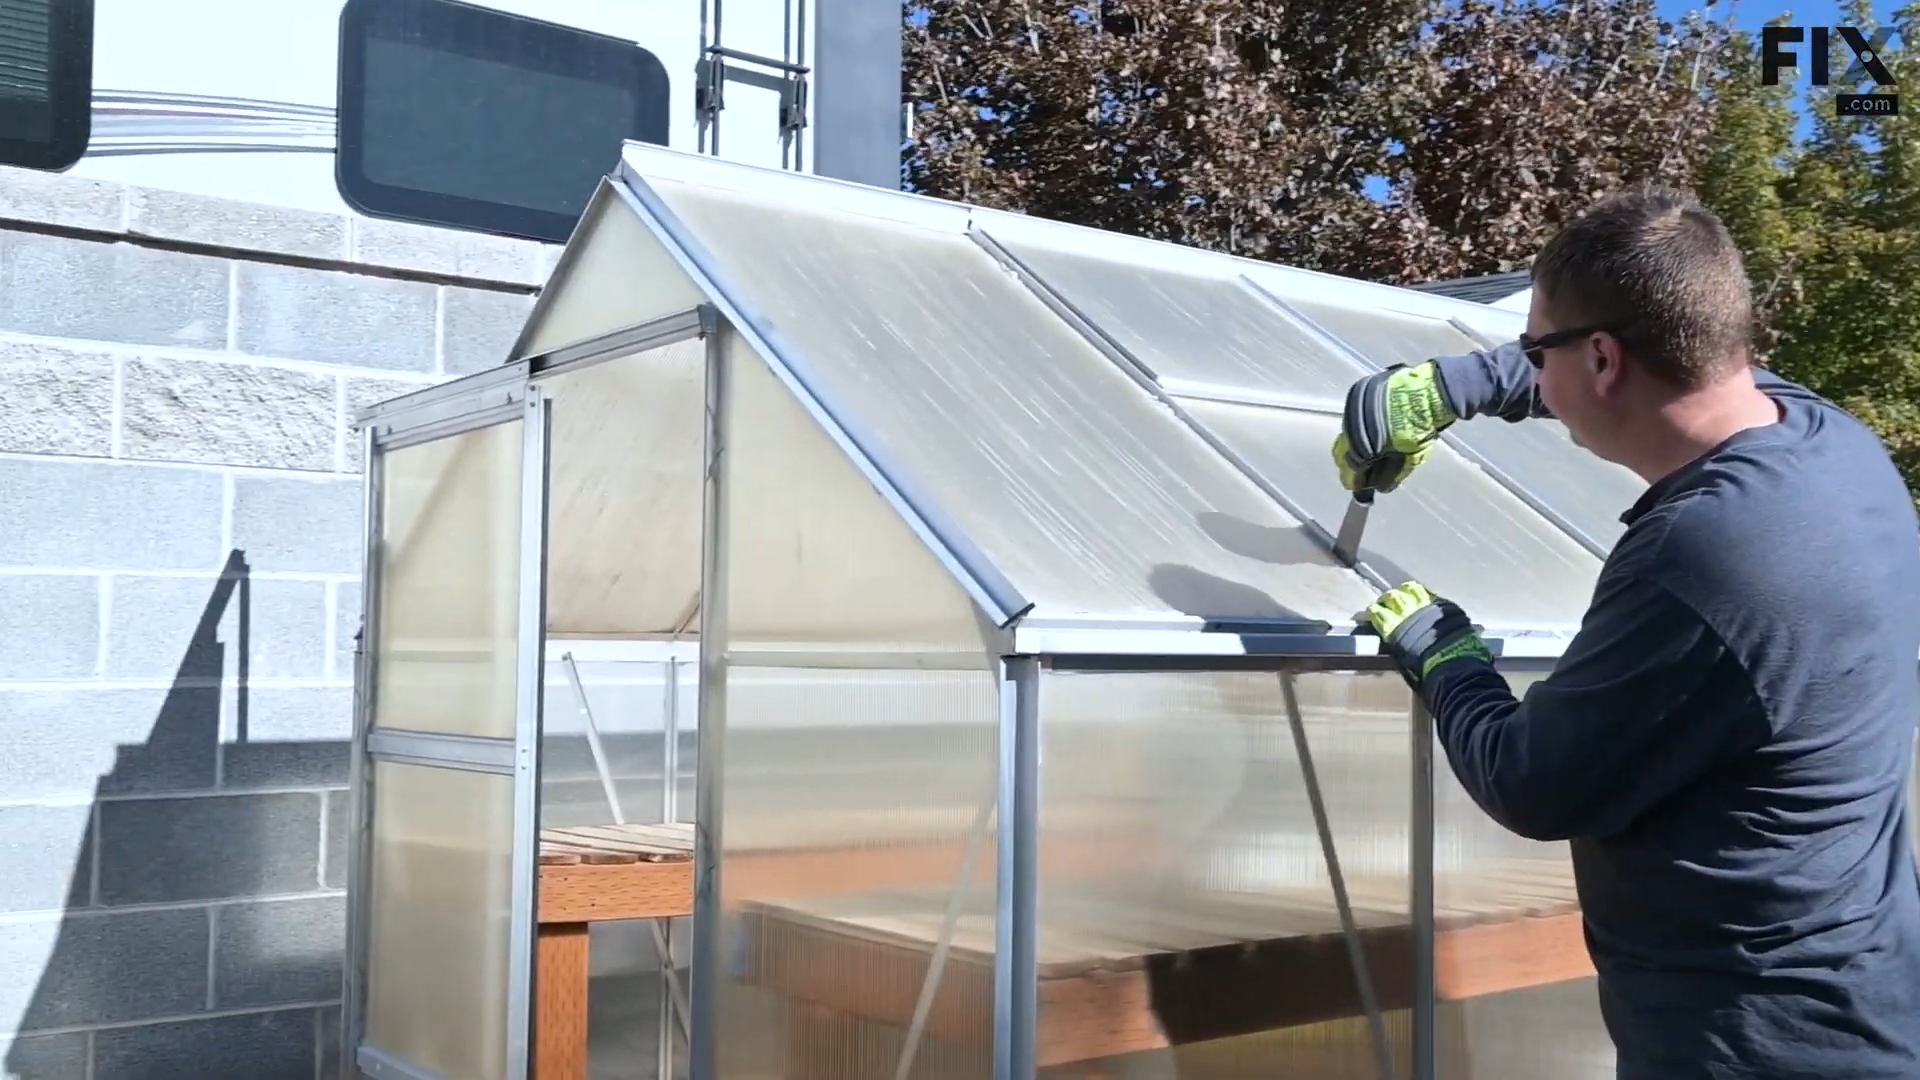 Expert technician using a putty knife to loosen the sides of a roof panel on a greenhouse by slotting the knife in between the panel and the roof frame and wiggling it